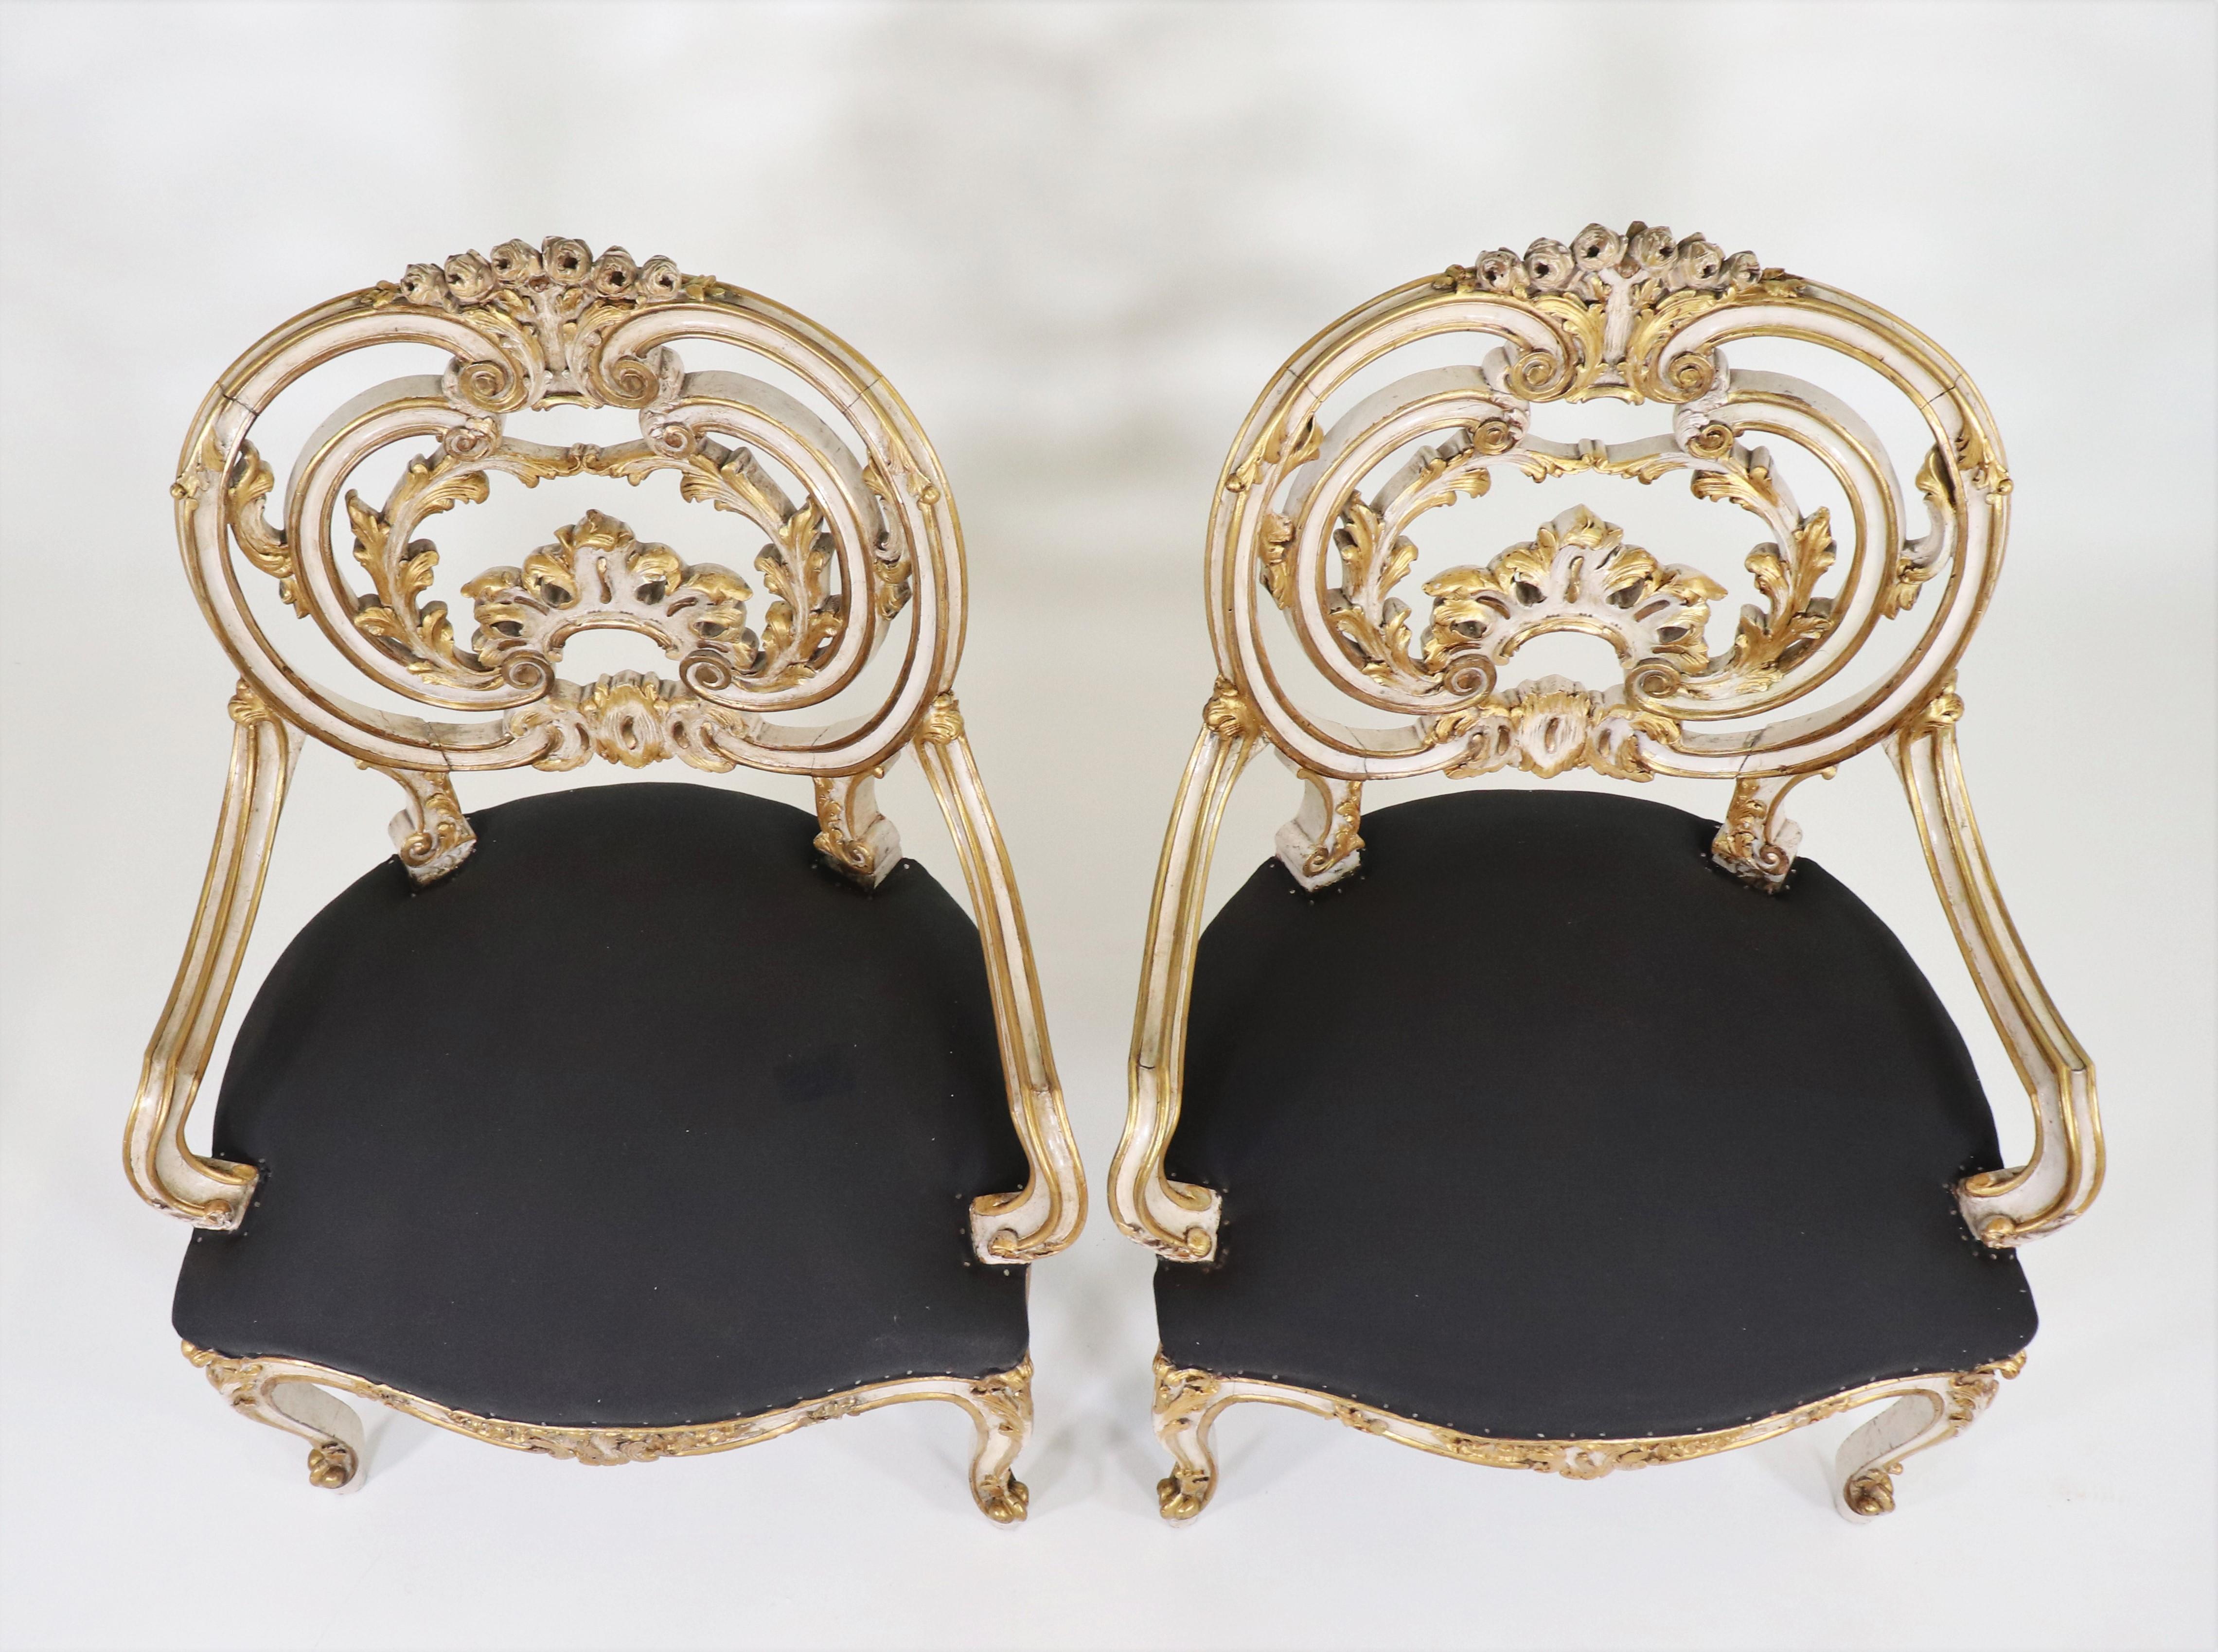 Pair of Late 19th century Louis XIV Style Fauteil Armchairs by the legendary Maison Jansen. Maison Jansen was an interior decoration house located in Paris and is considered the first truly global design firm. These magnificent hand-carved beechwood